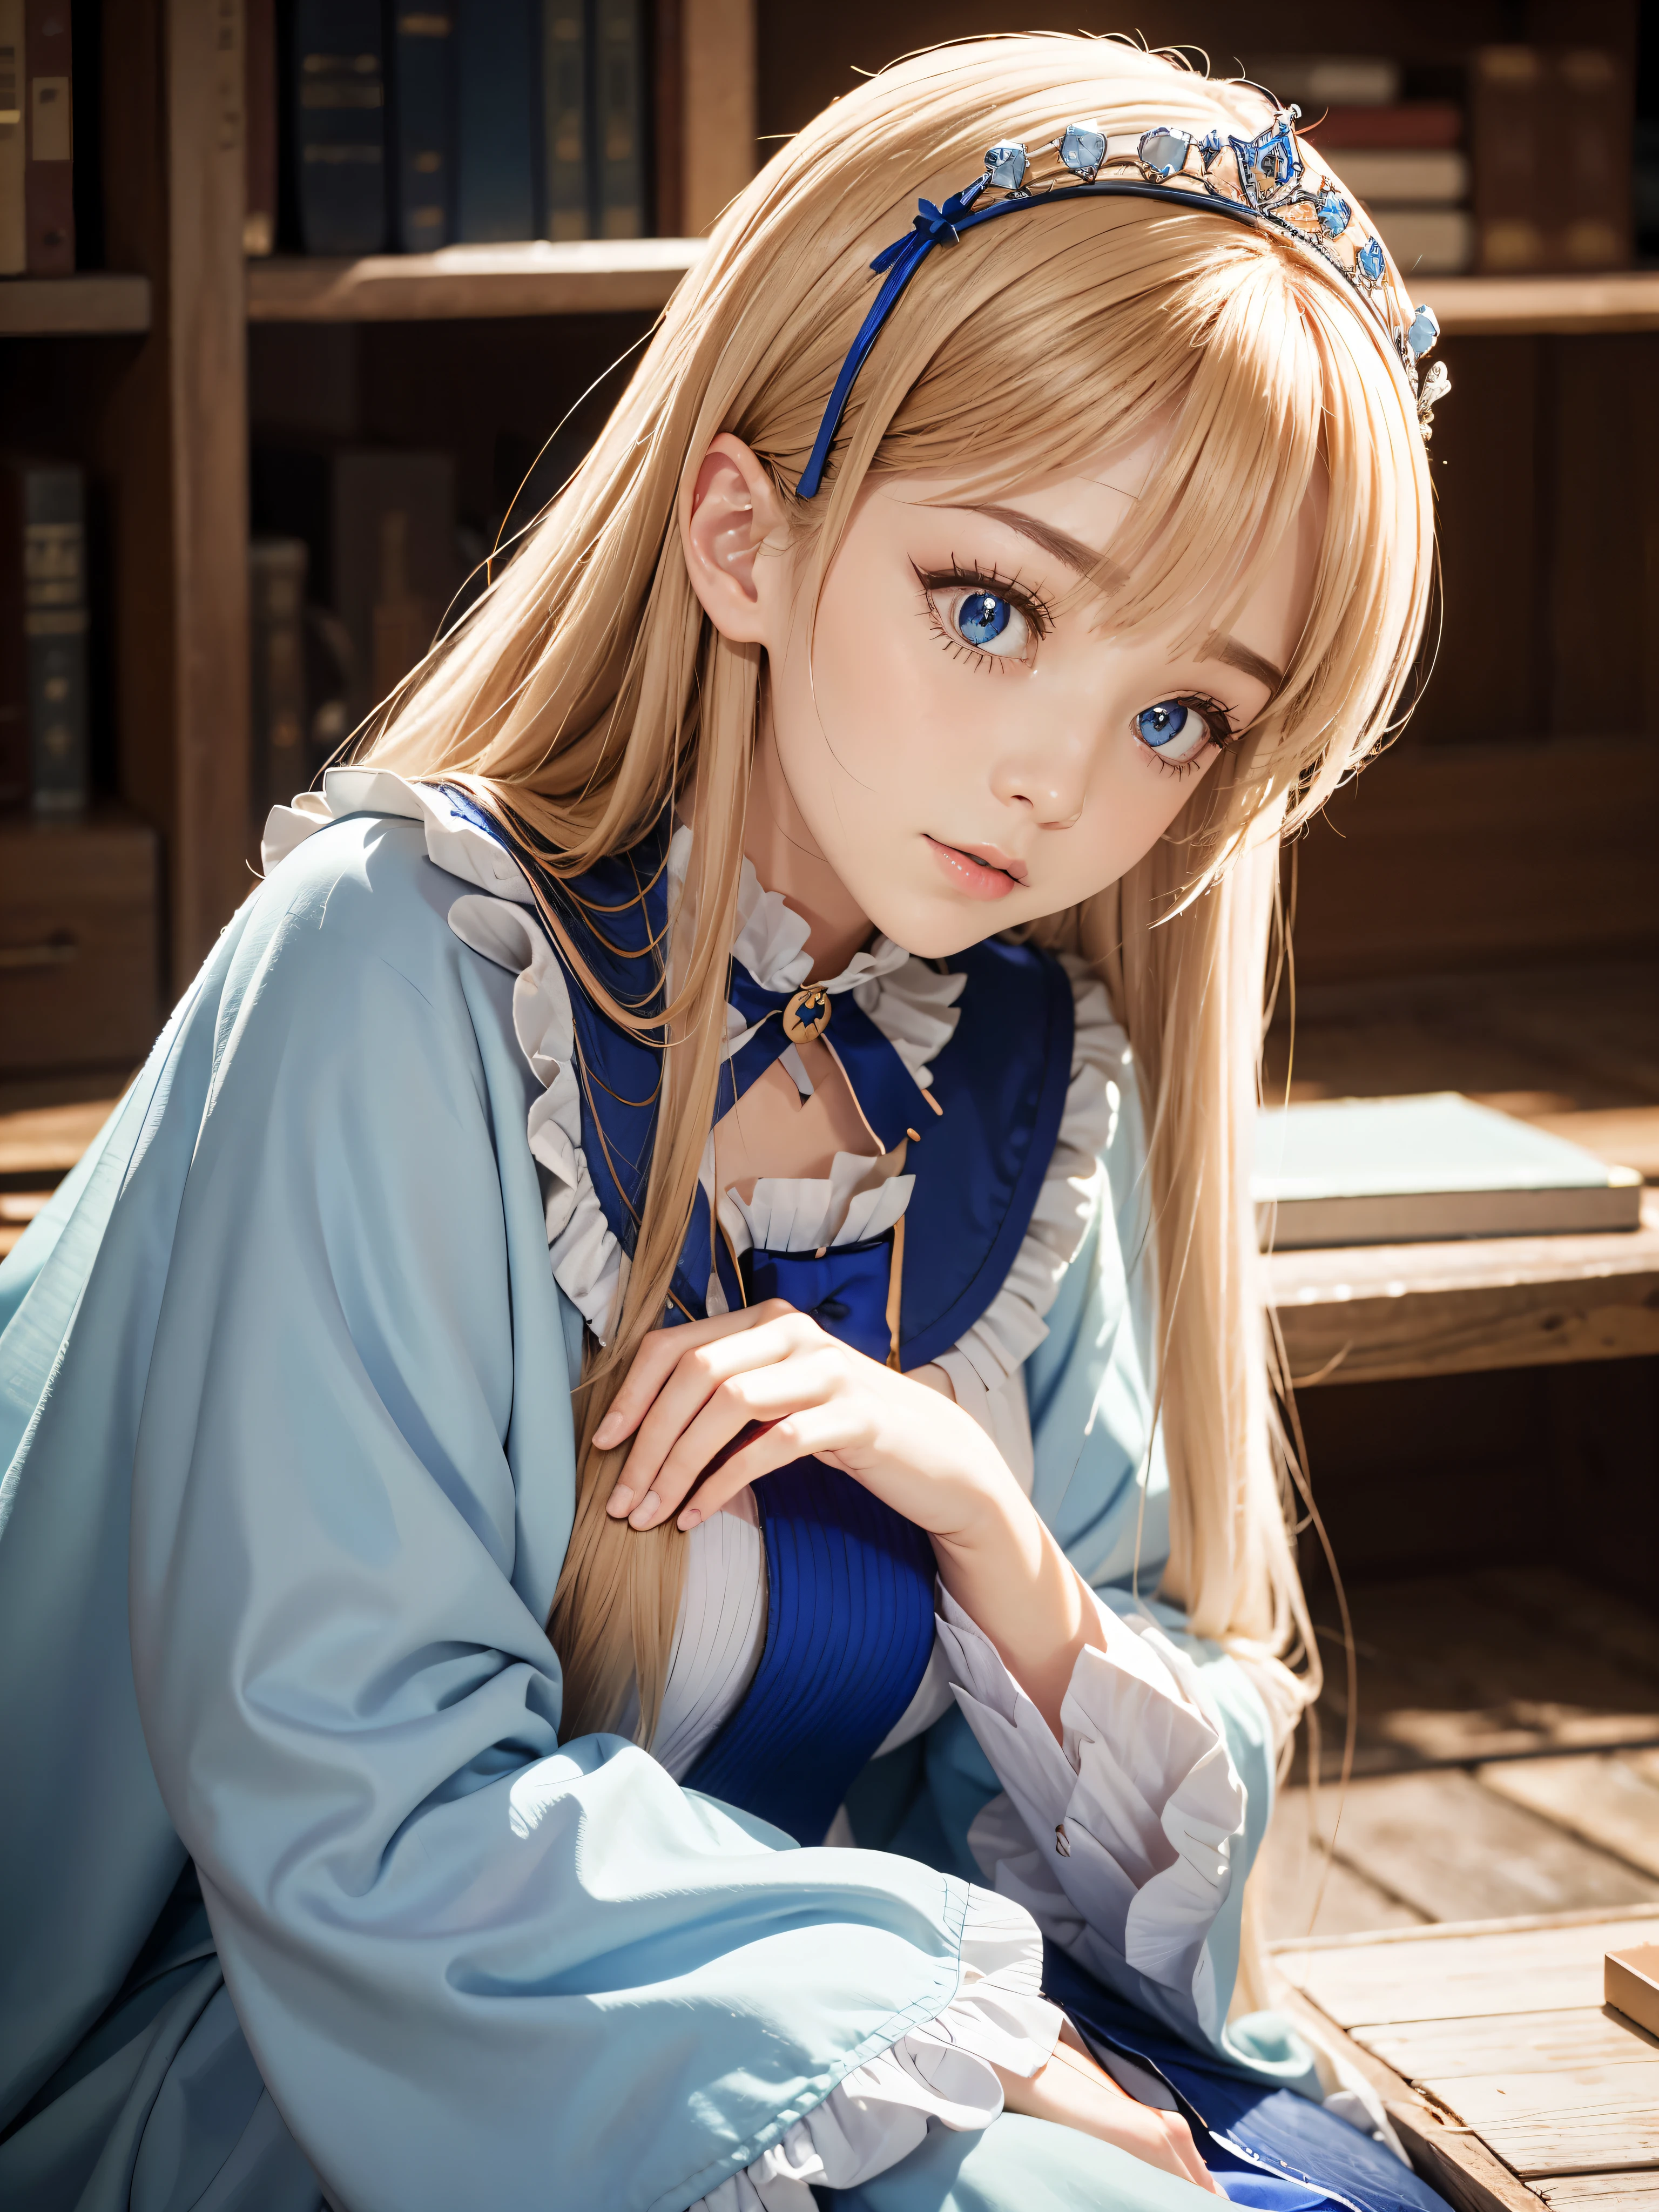 Raw Photography, High Resolution, Realistic, Masterpiece, 18 year old, Mia Luna Tearmoon, Looking at Viewer, Single, Attending Academical Class in Victorian Era, Detailed cute and beautiful face, White shiny skin, bangs, Blonde Super Long Straight Silky Hair, Blue Eyes, Crown, Perfect and Nice Hands, Starting to Cry with Tears